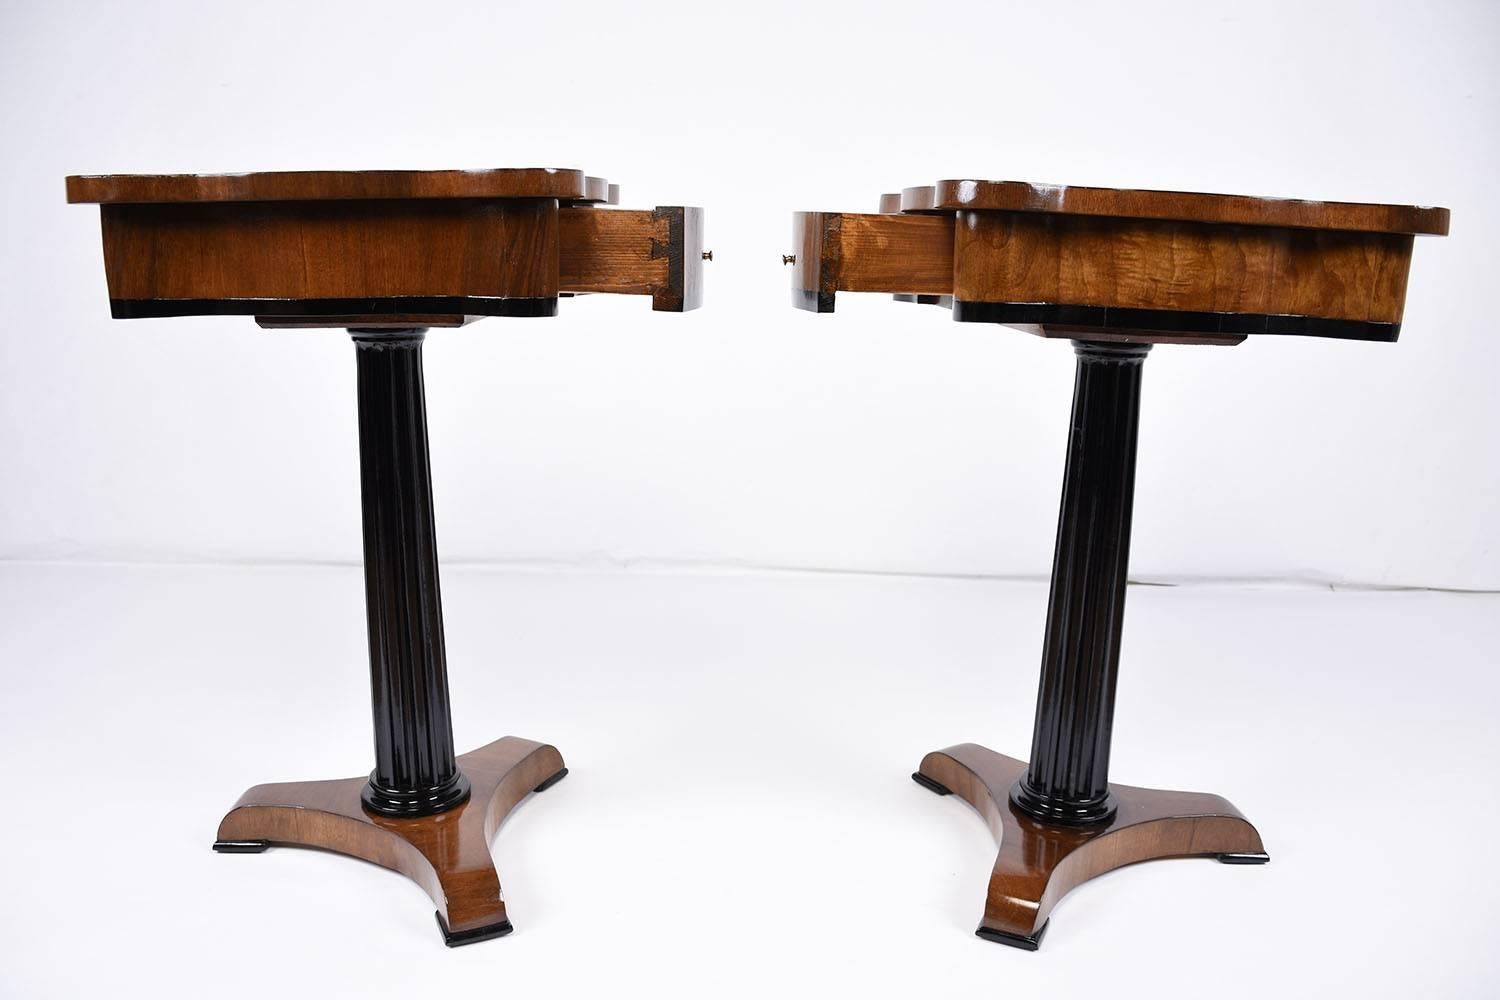 This stunning 1970's Vintage pair of Empire-style end tables are made of mahogany wood finished in a walnut color stain and a black stain on the pedestal legs. The undulating edge of the table top beautifully accents the square inlaid burlwood